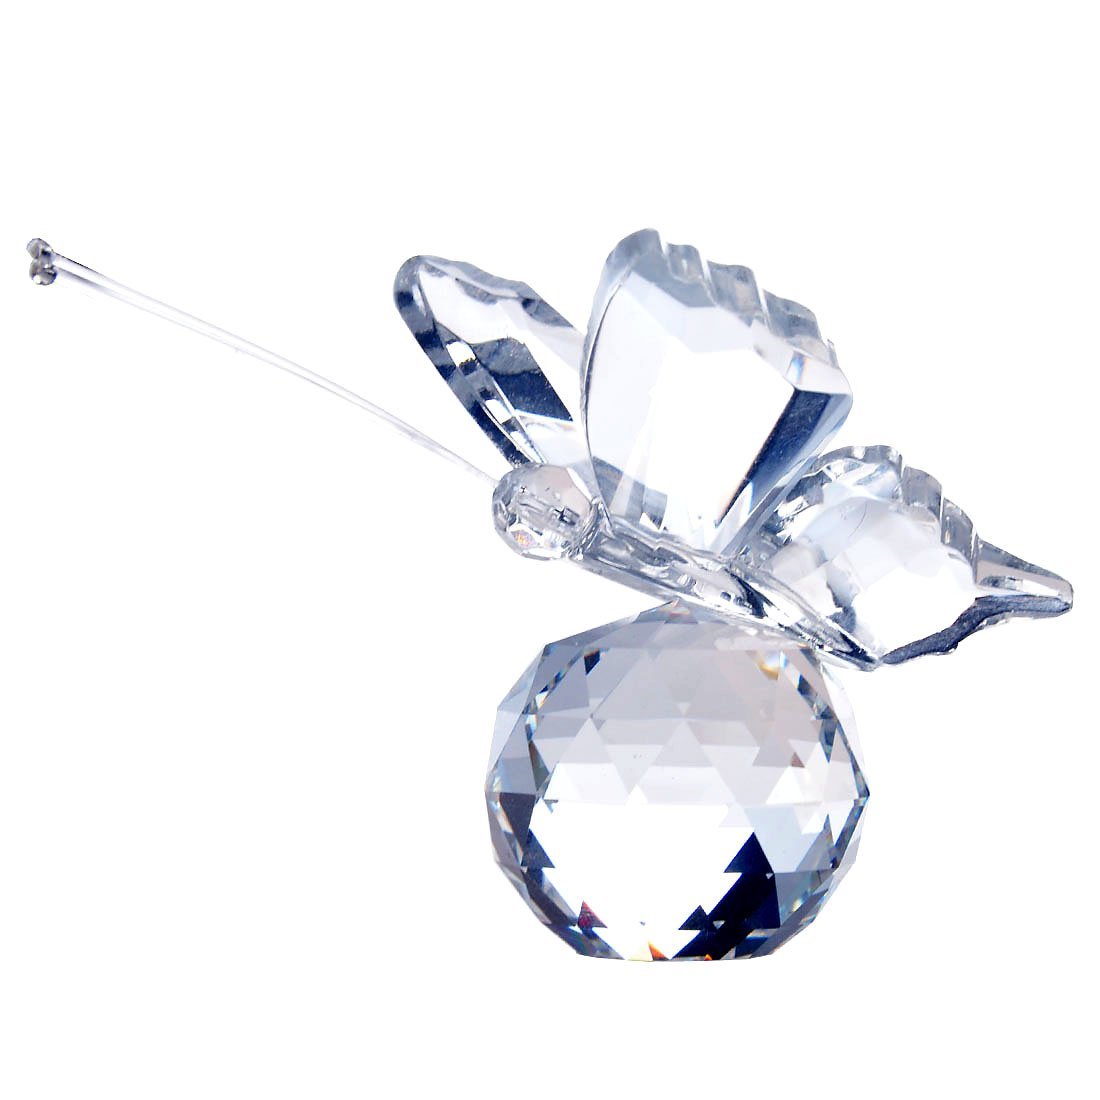 YUFENG Cute Crystal Flying Butterfly with Crystal Ball Base Figurine Collection Cut Glass Ornament Statue Animal Collectible (clear)